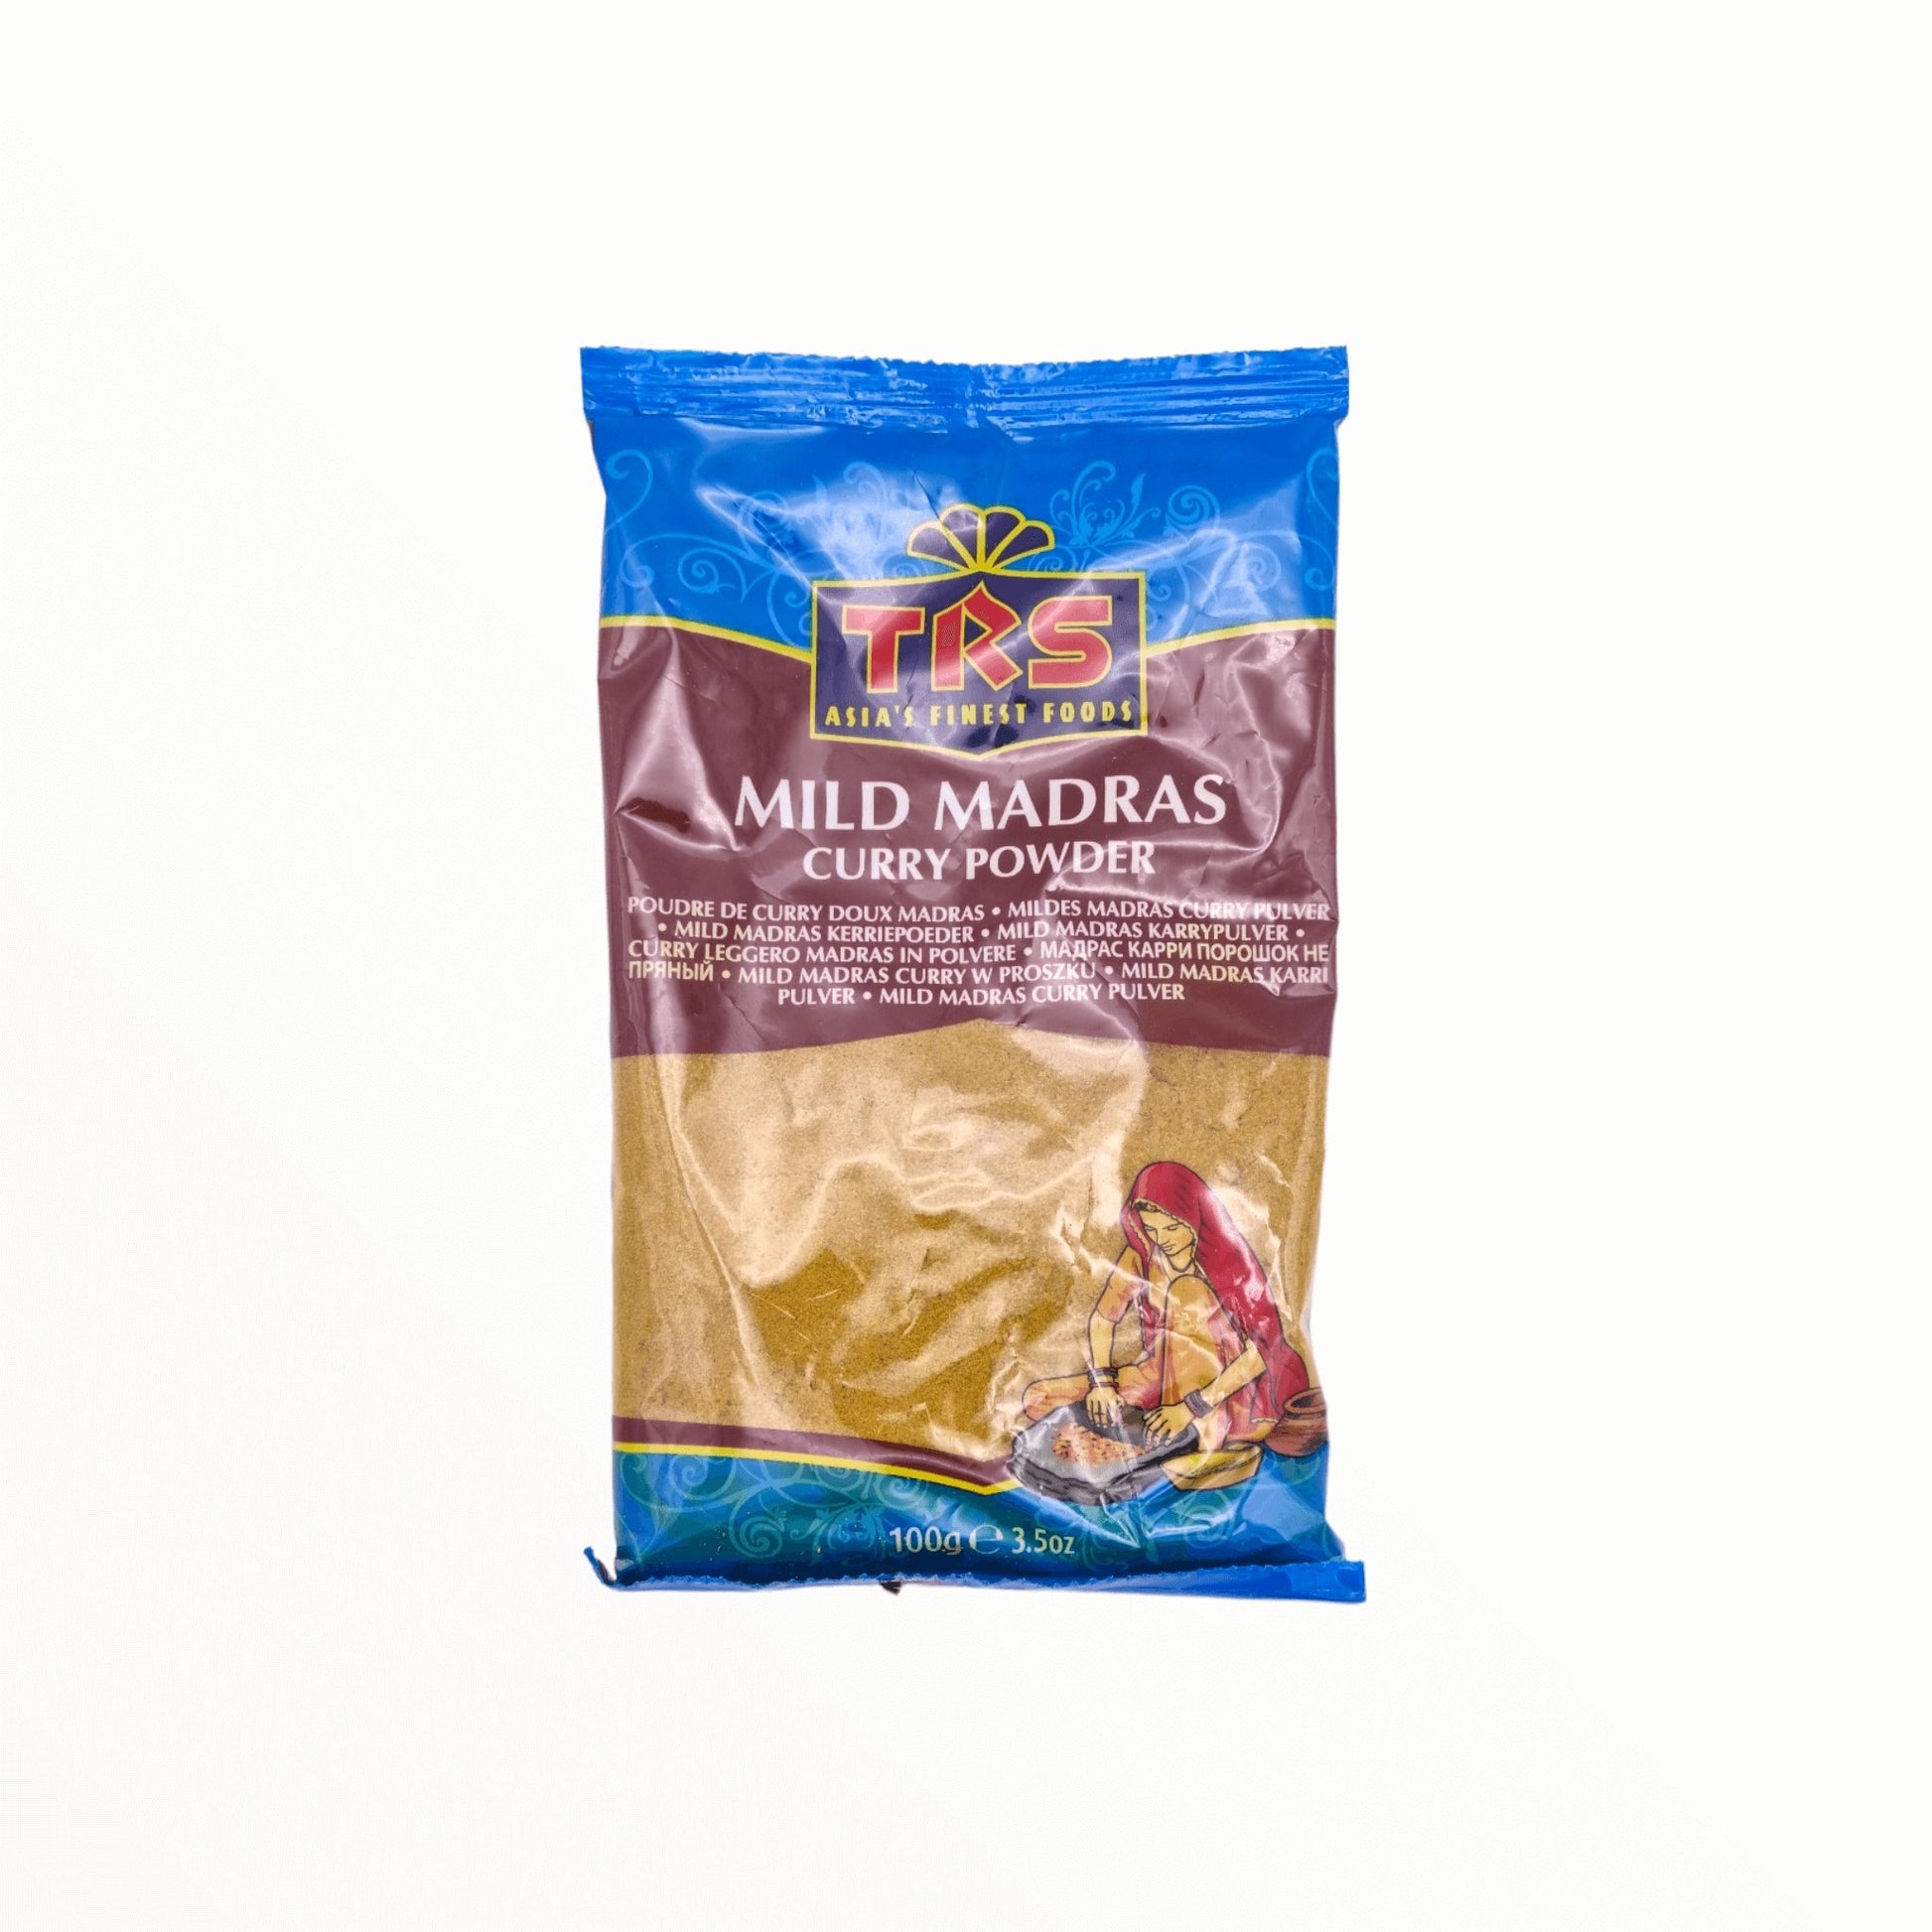 Mild Madras Curry Pulver 100g - Mabuhay Pinoy Asia Shop